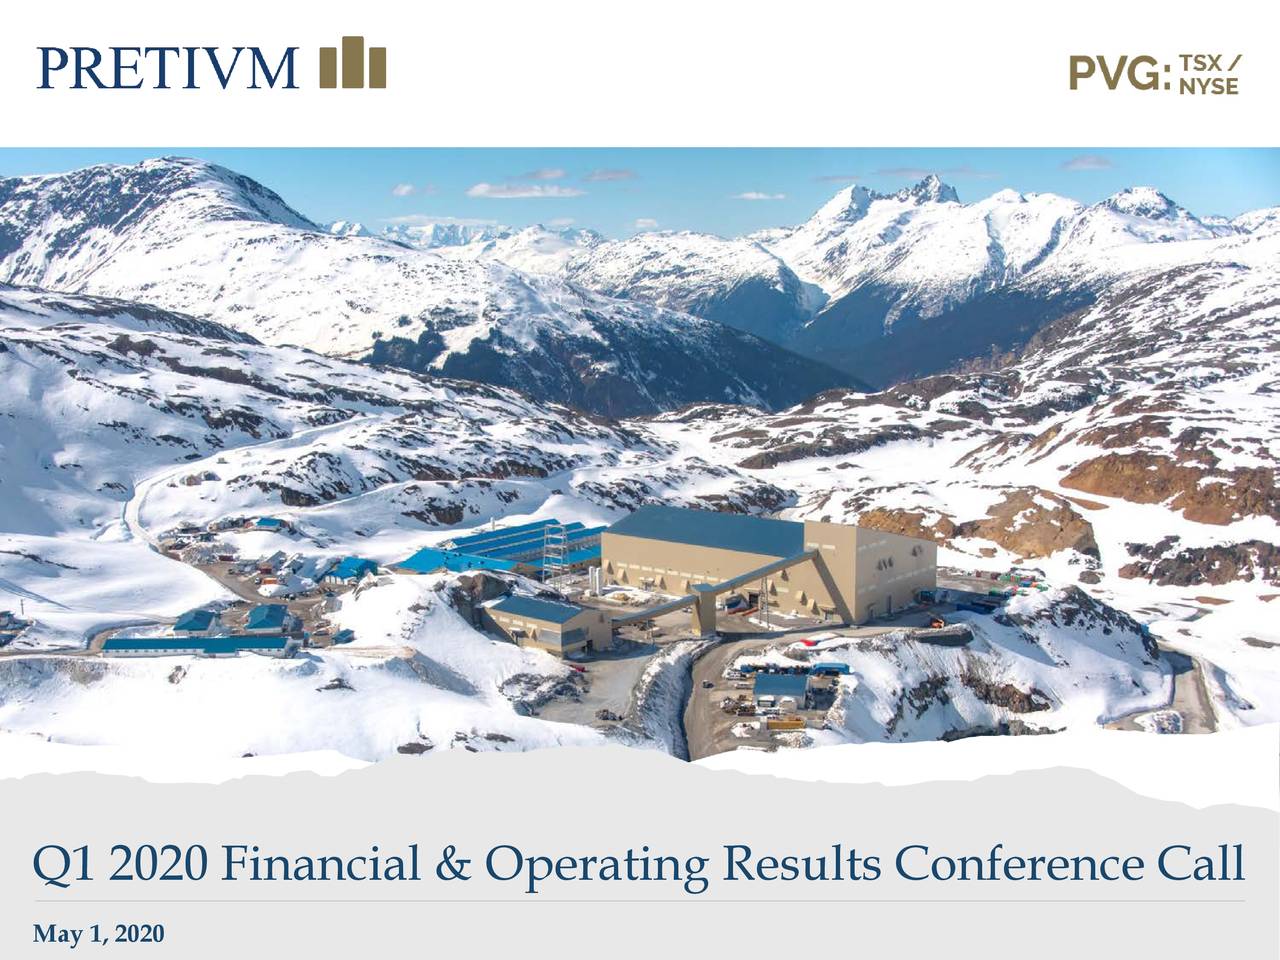 Q1 2020 Financial & Operating Results Conference Call